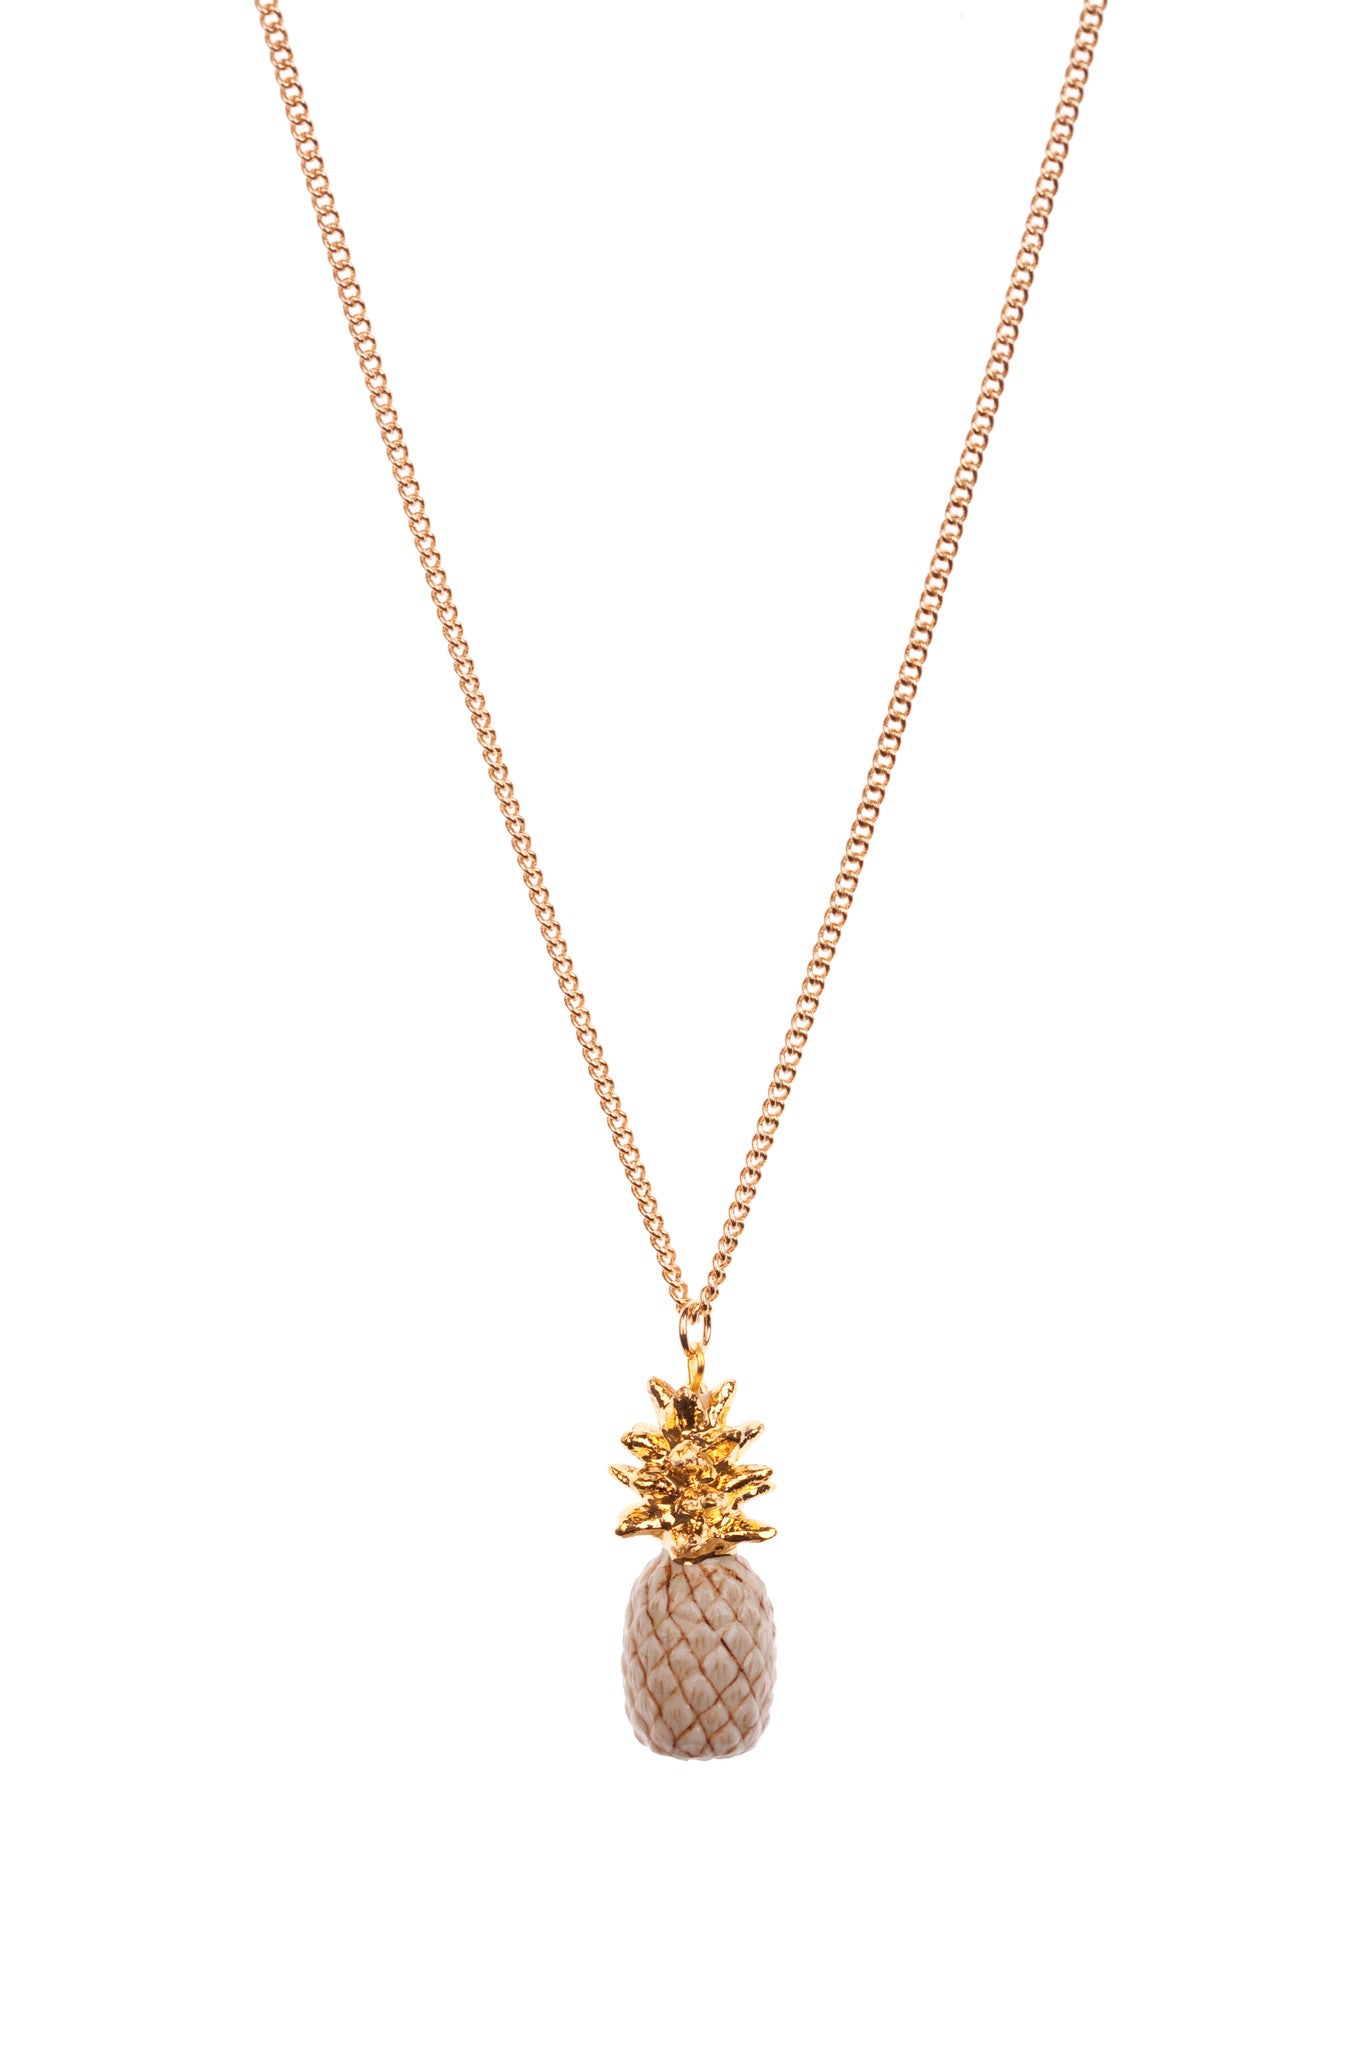 Small Pineapple Necklace with Gold Leaves